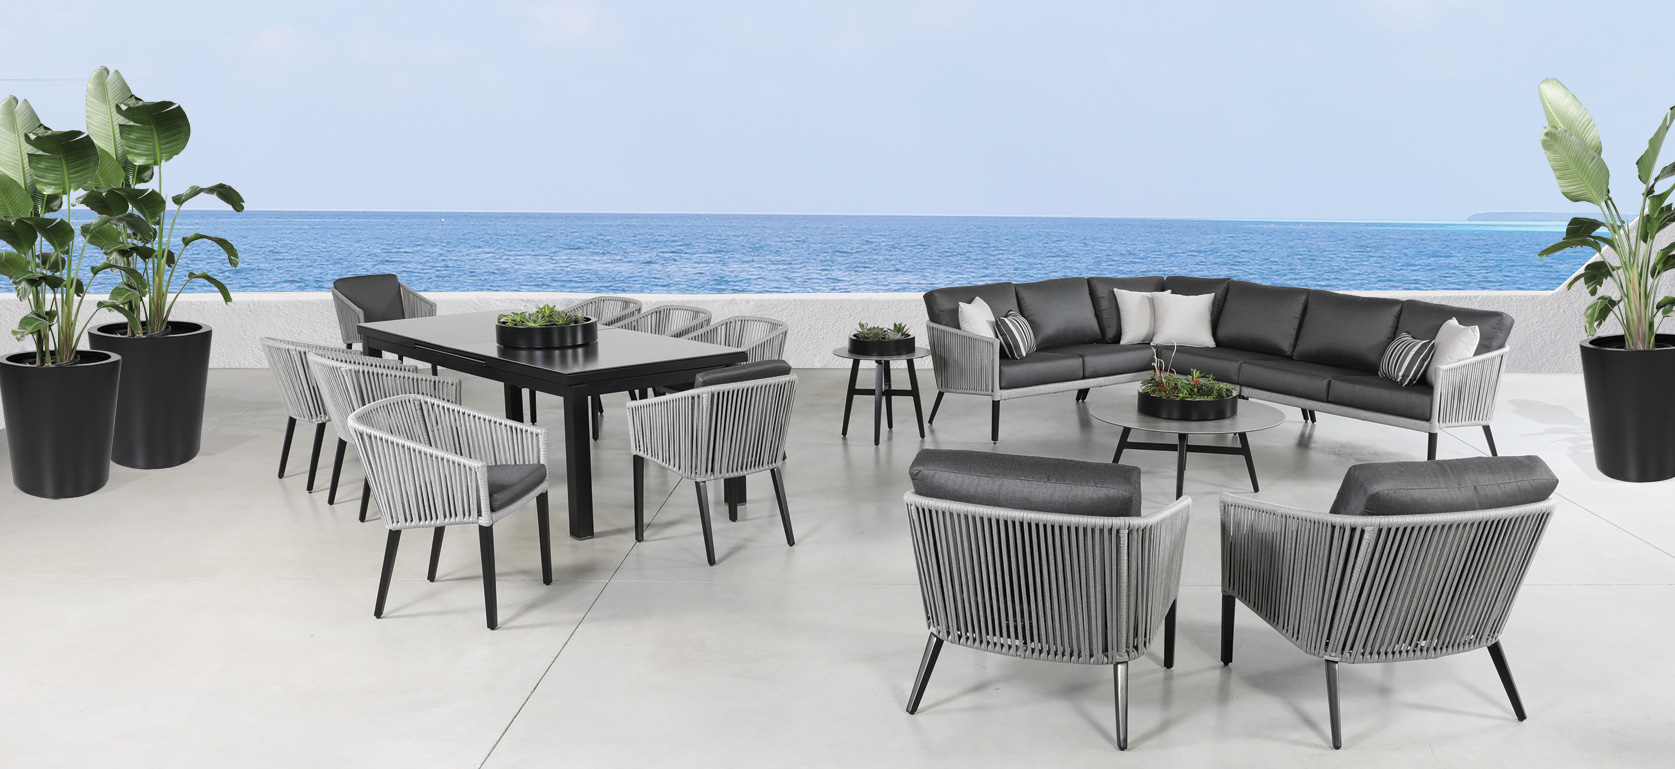 For Outdoor Furniture At Your, Patio Furniture Barrie Ontario